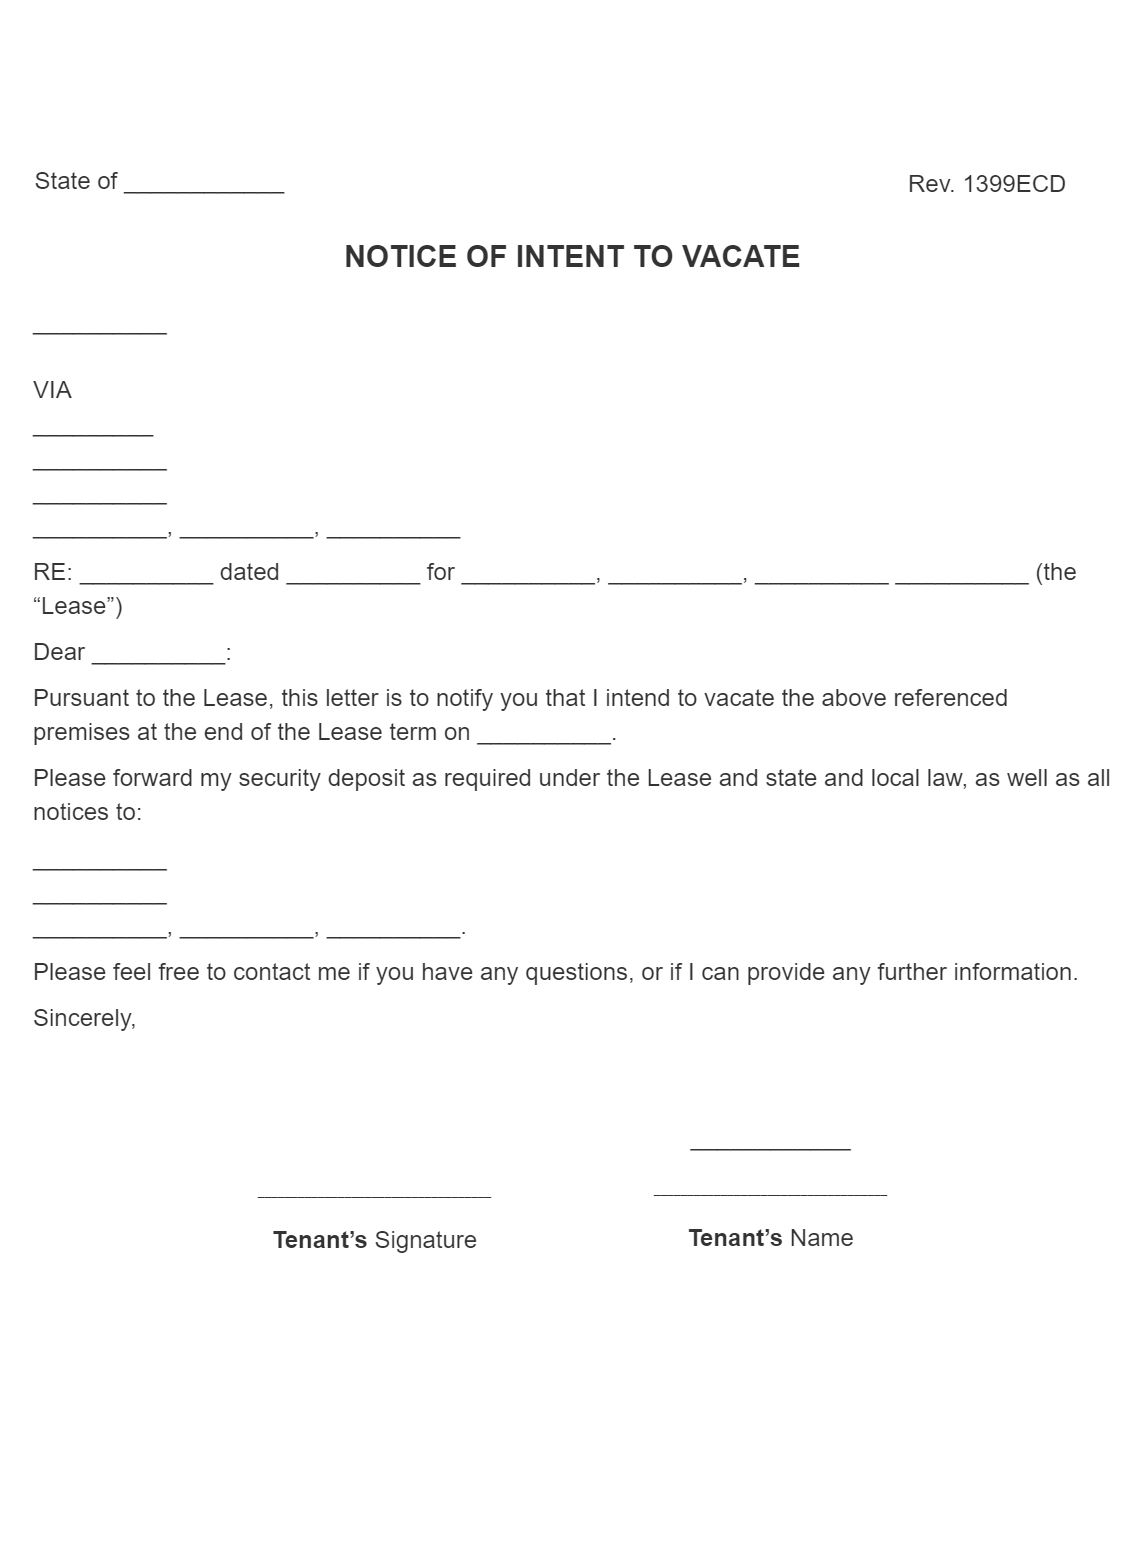 SignSimpli: Notice of Intent To Vacate